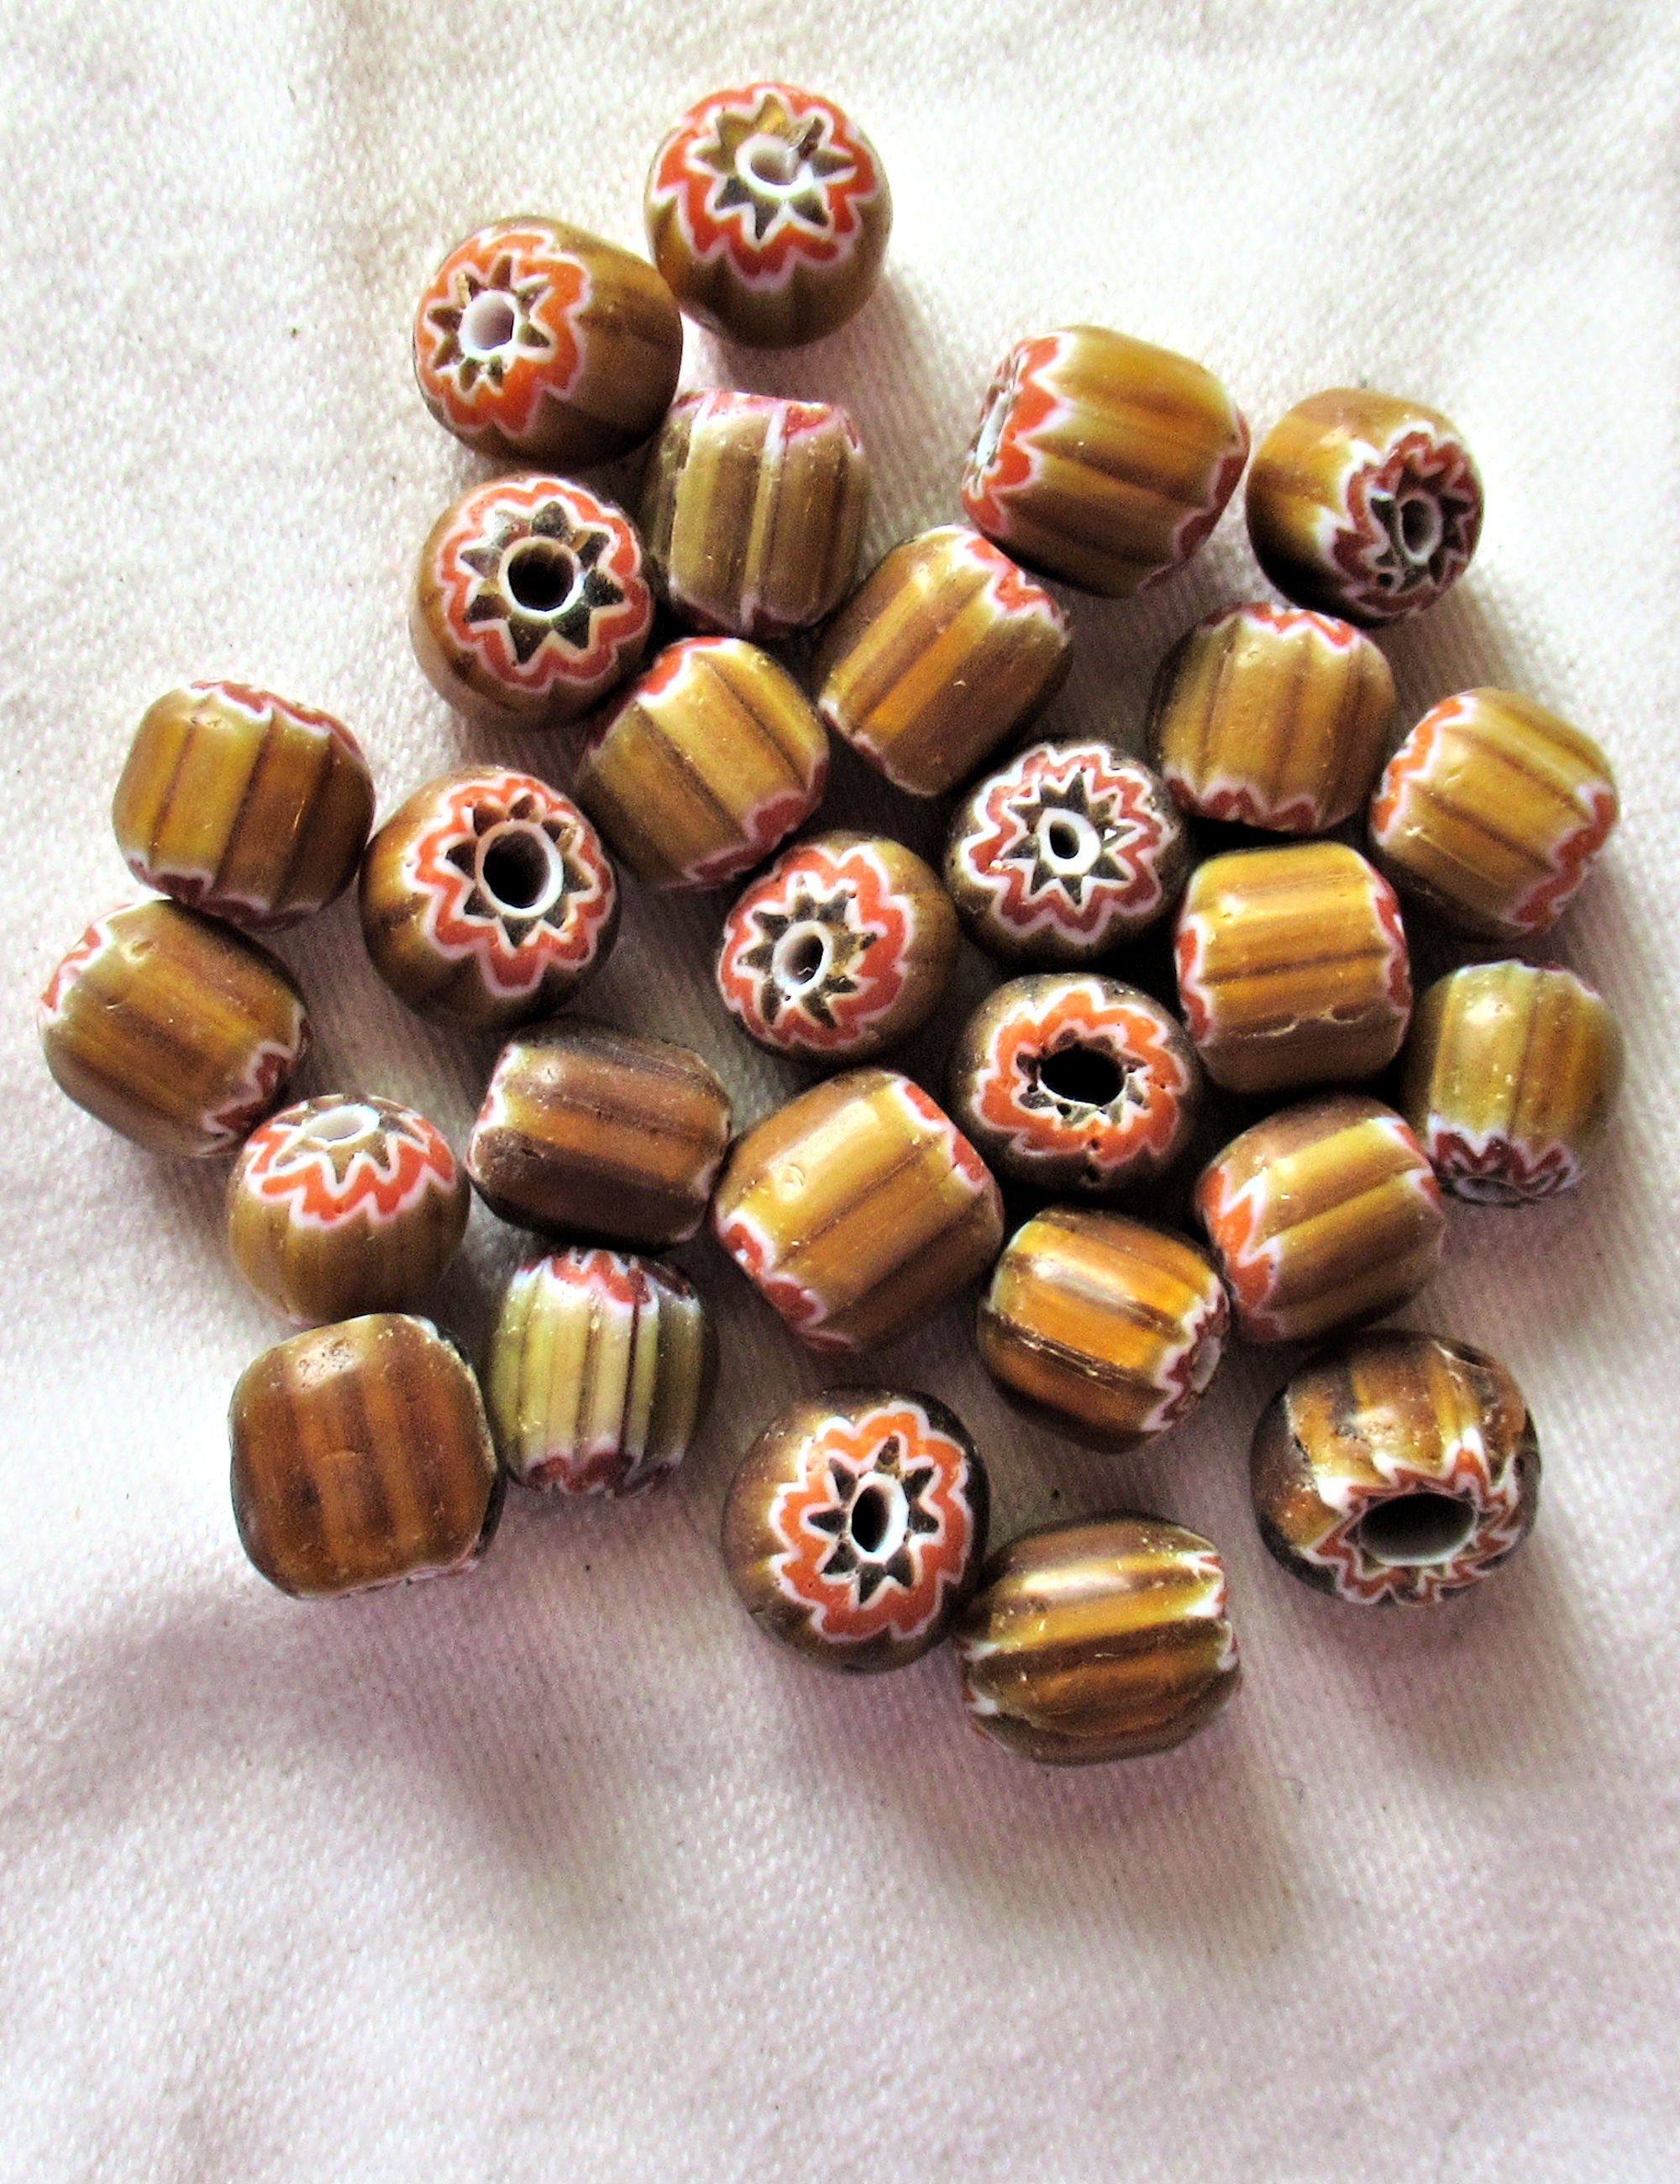 lot of 15 brown & white striped glass chevron tube beads - red and black  accents - approx 8 x 10mm rustic earthy big hole barrel beads C9501